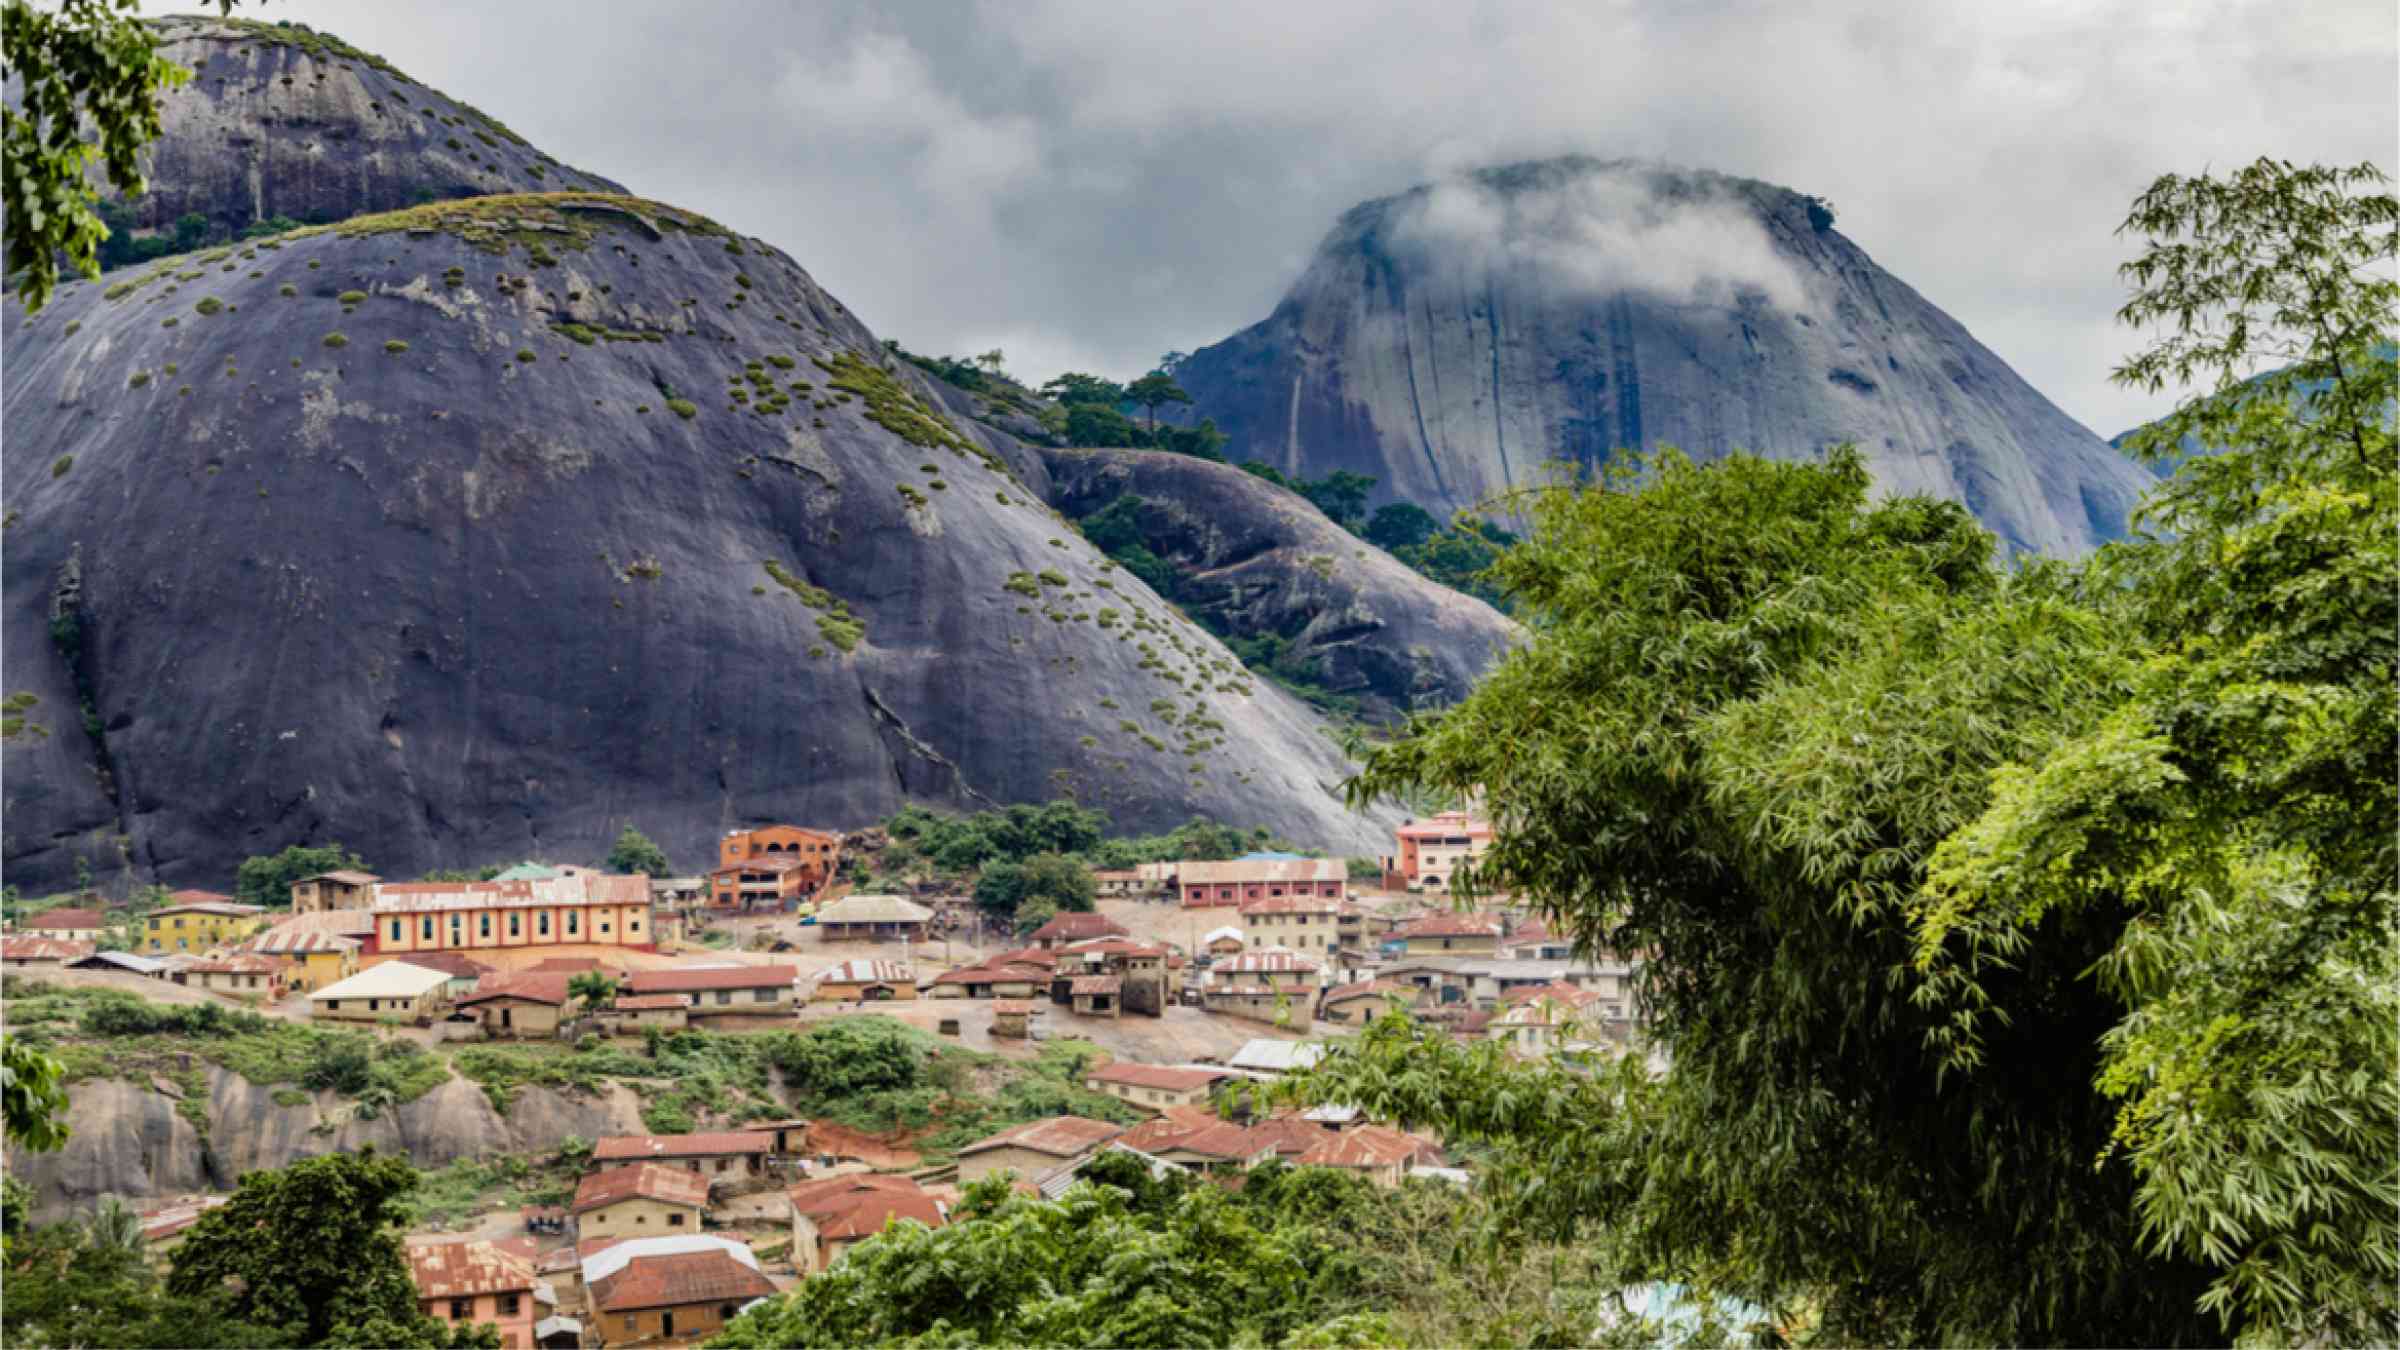 Idanre Hill , a beautiful natural landscape in Nigeria. The people of Idanre lived on these massive rocks for over a hundred years. 